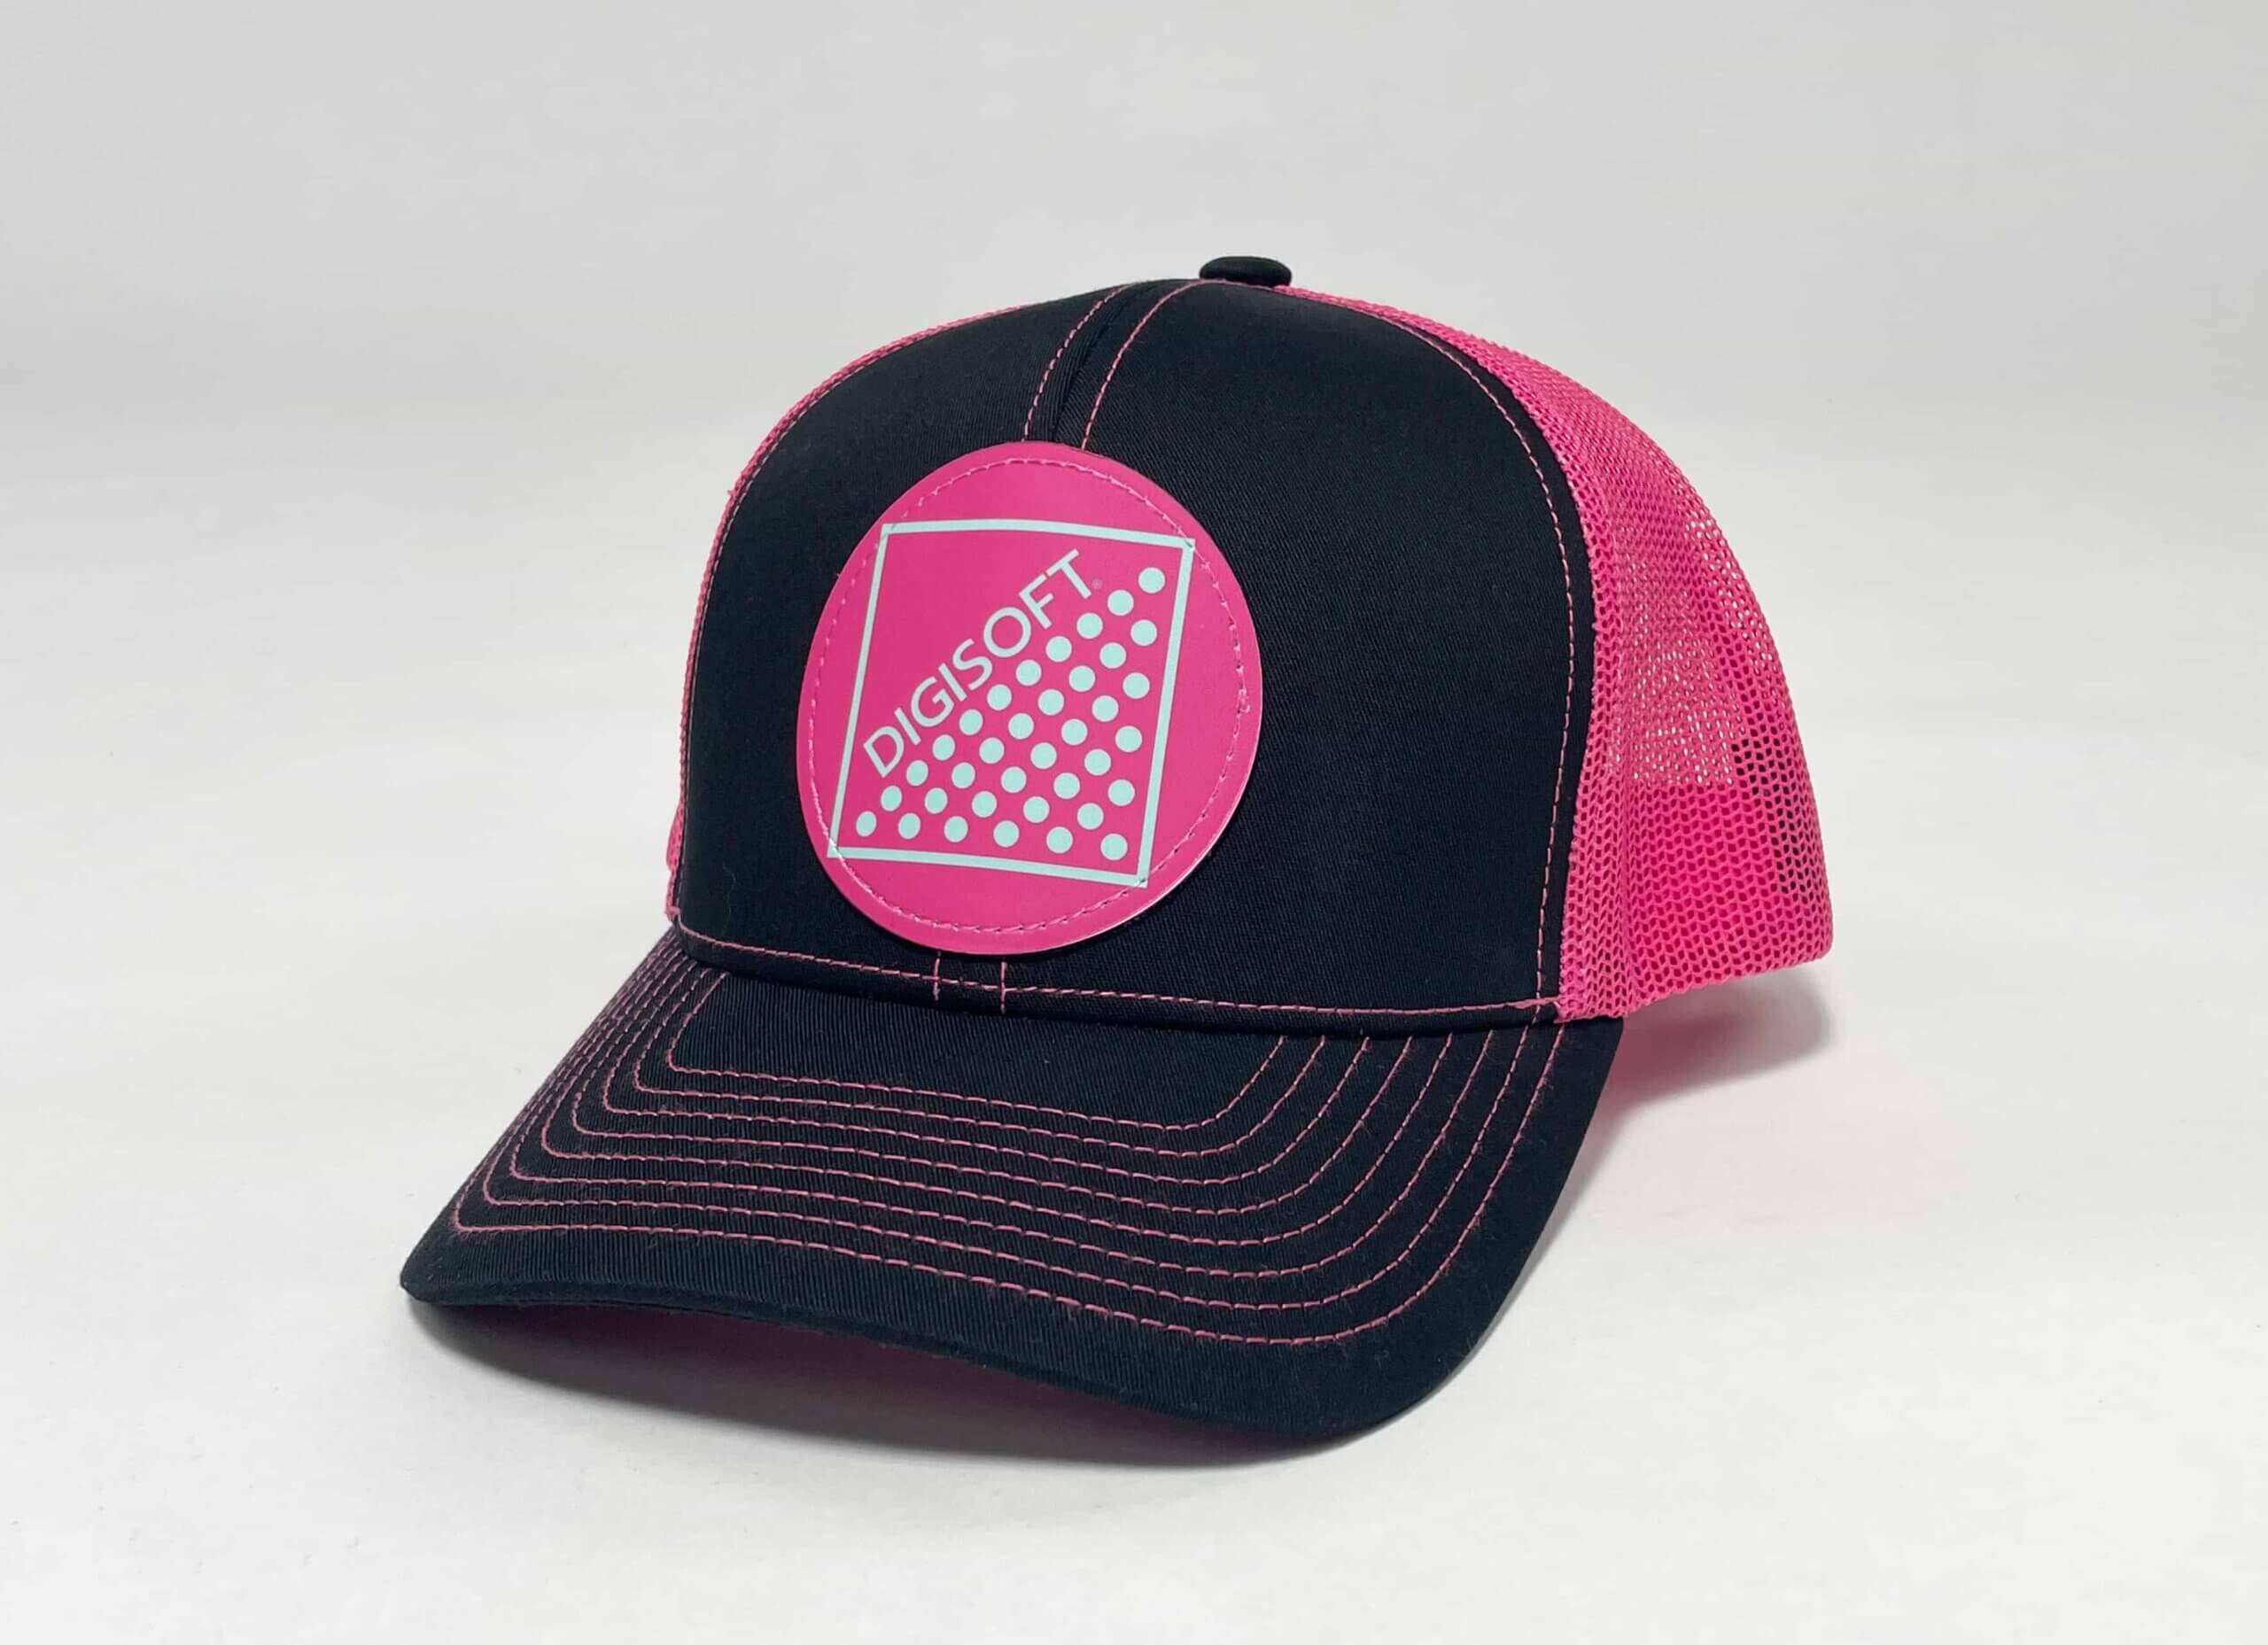 Trucker Cap for Sublimation, 12 Each, 10 Colors - Pink/White